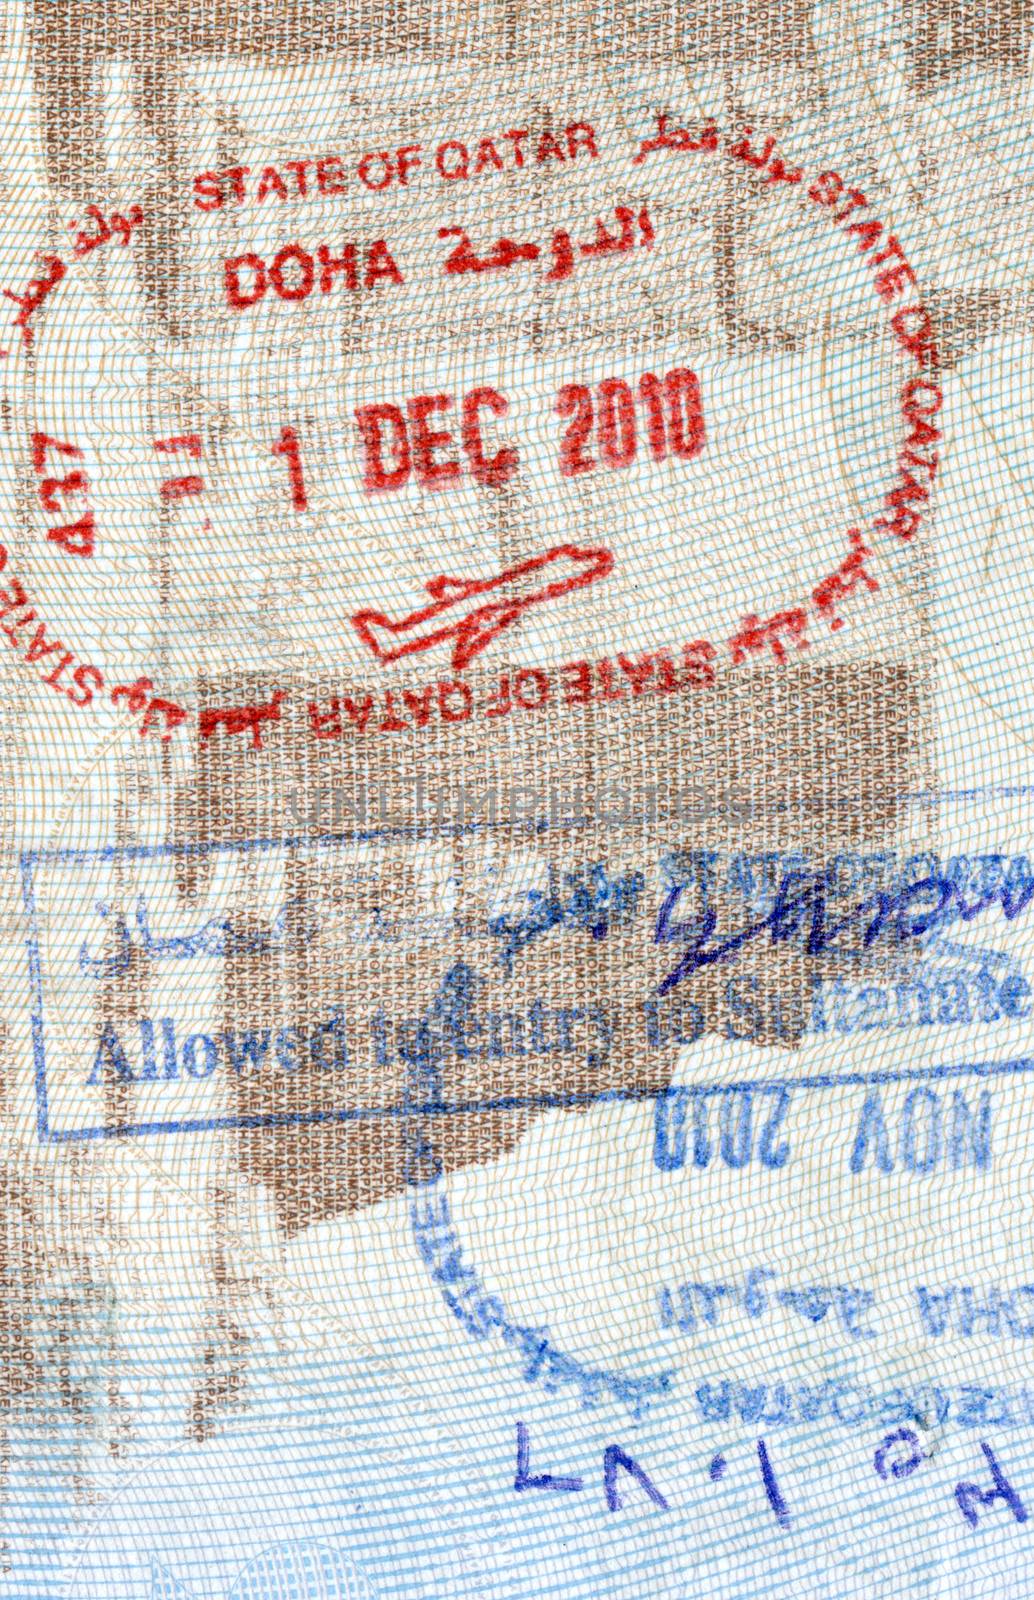 Visa stamps exit and entry - immigration arrival stamps on Greek passport